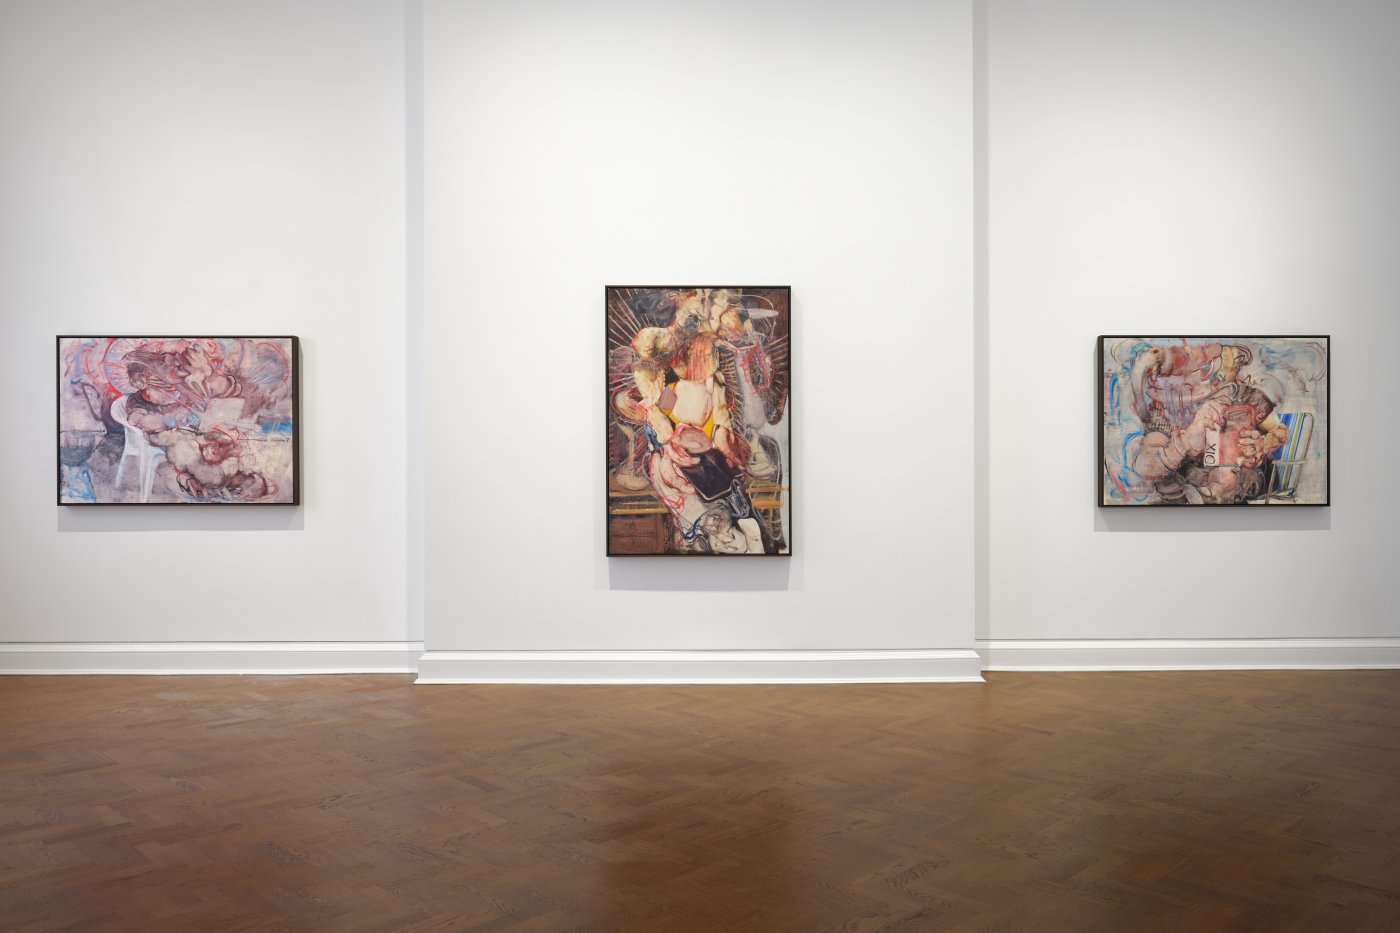 Installation image for Adrian Ghenie: The Fear of NOW, at Thaddaeus Ropac